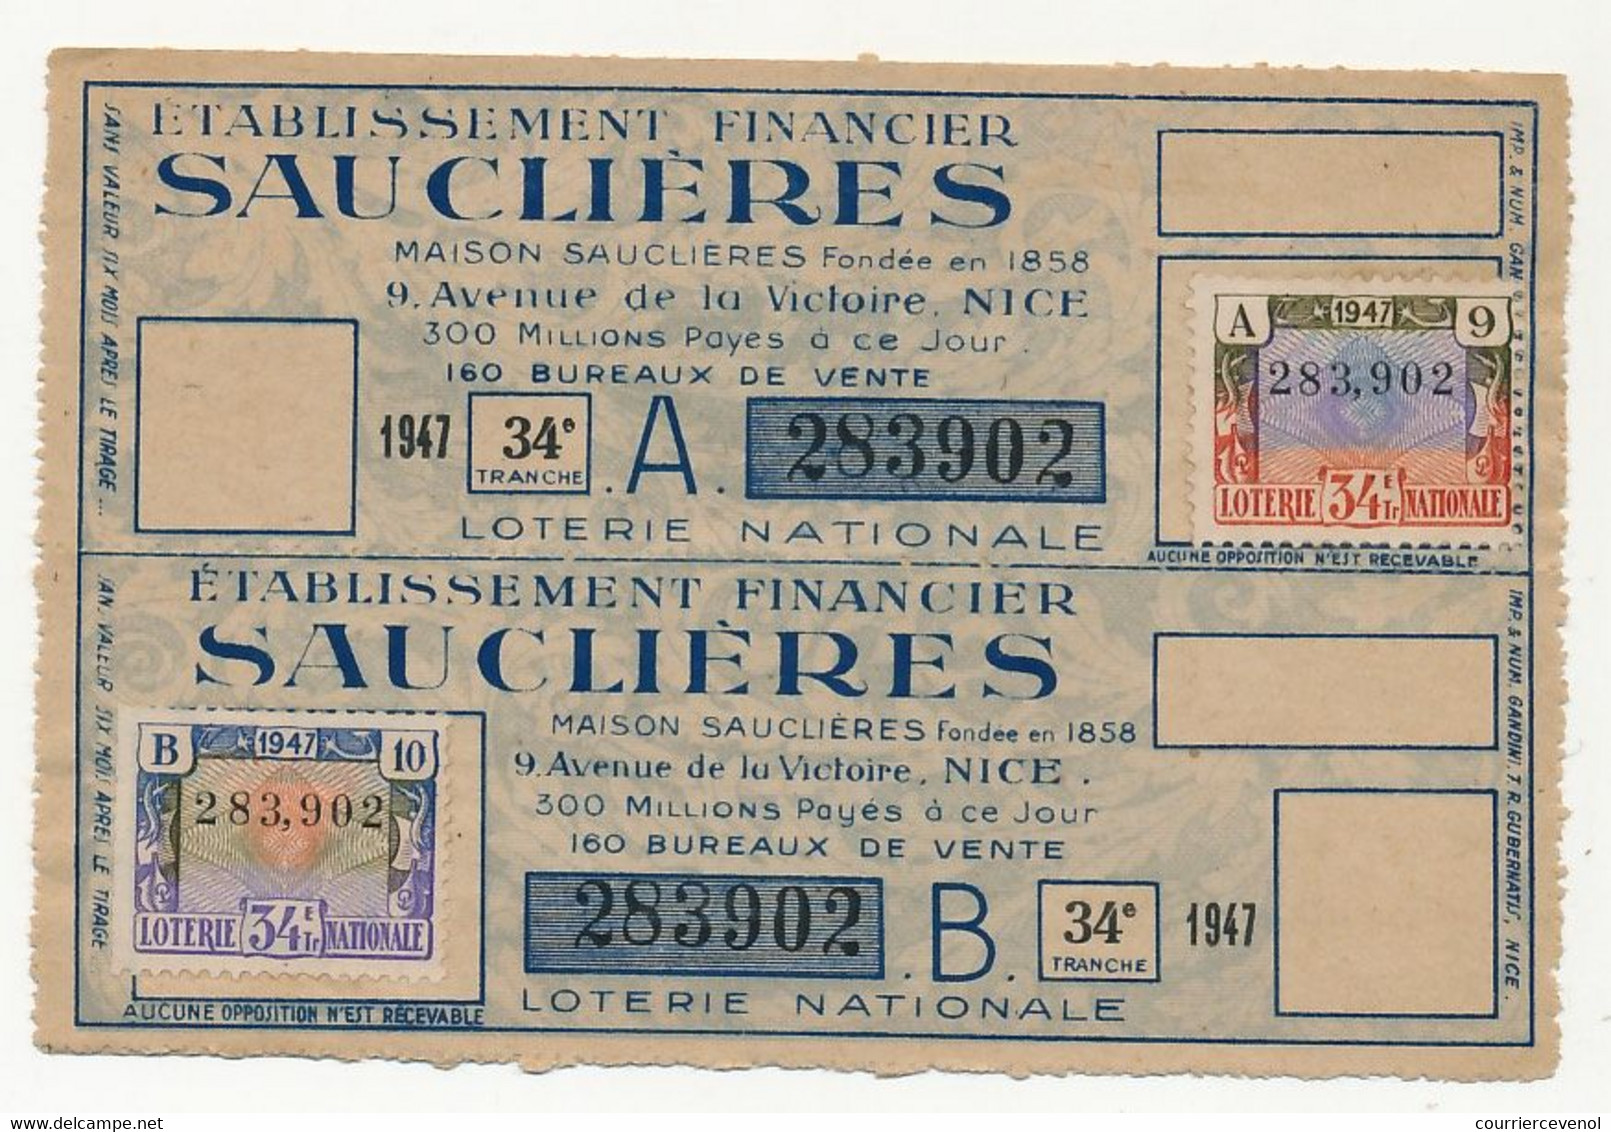 FRANCE - Loterie Nationale - 2 Billets A + B - Banque Sauclières - 34eme Tranche 1947 - Lottery Tickets